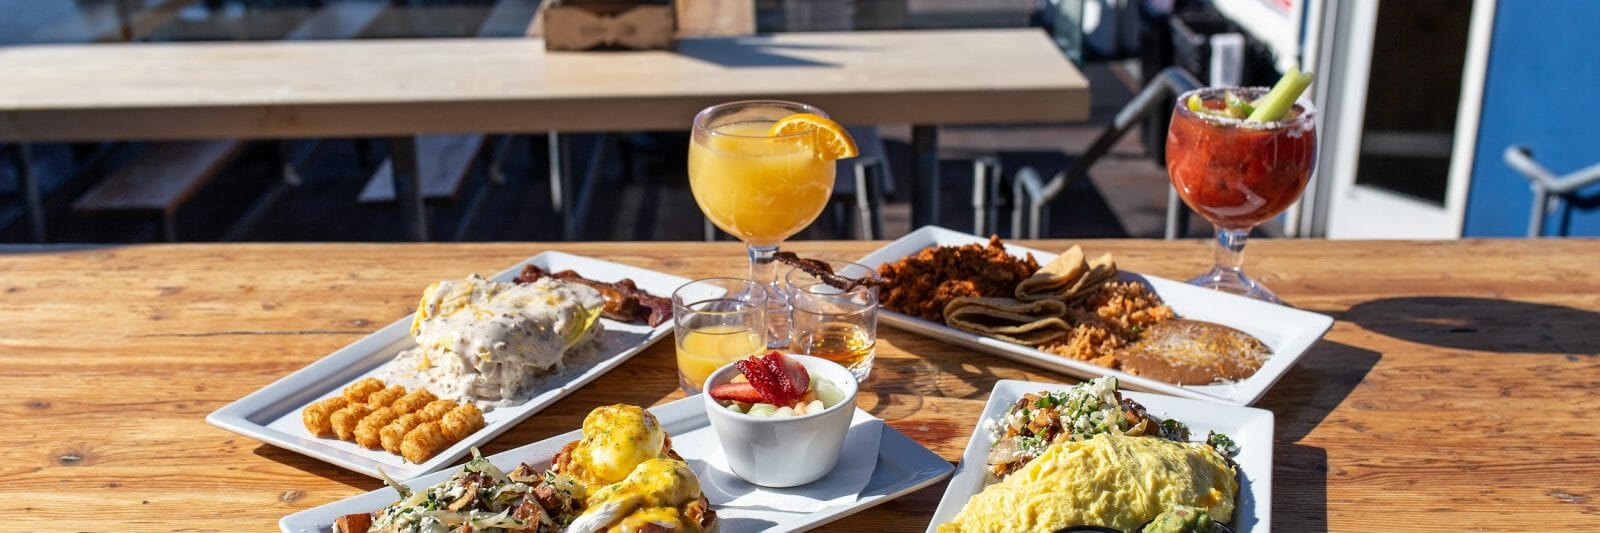 Several plates filled with breakfast foods near glasses of mimosas are displayed on a table with more chairs and the beach in the background